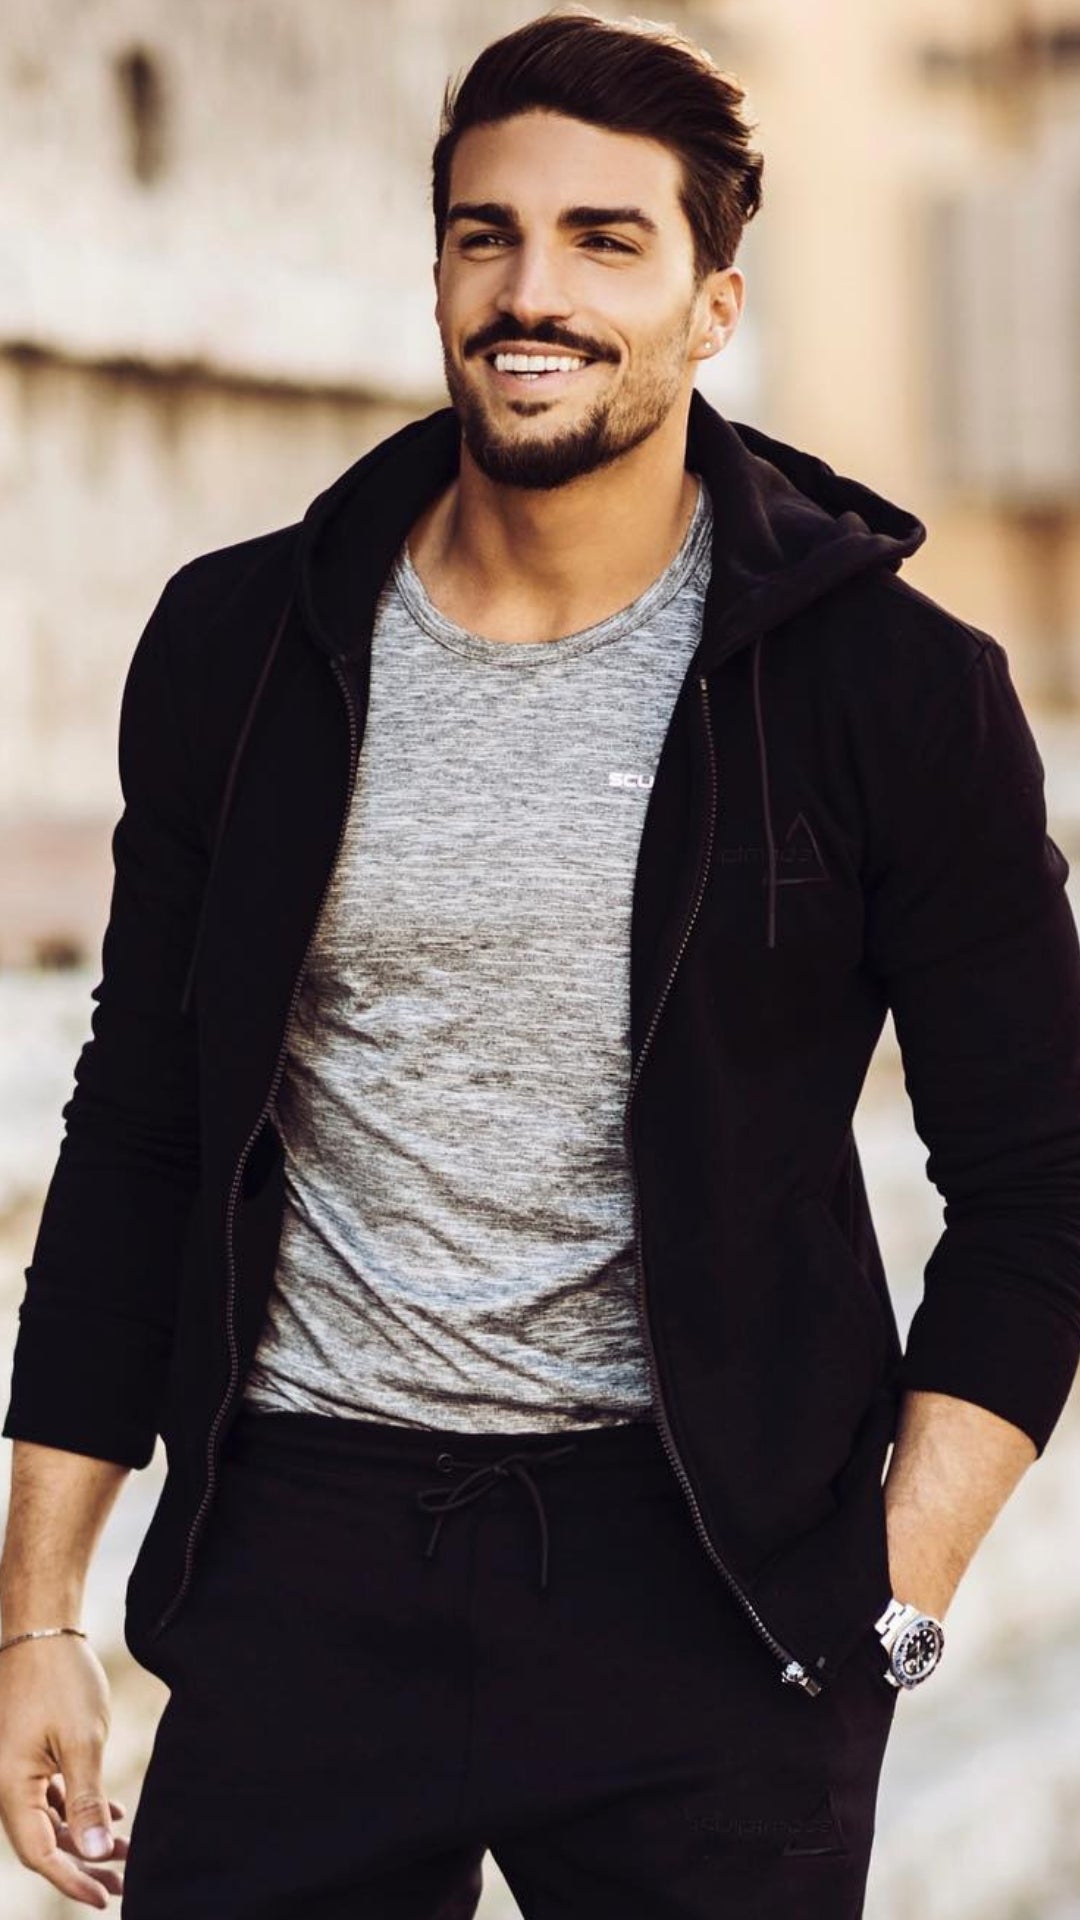 5 Outfits I'm Stealing From Mariano Di Vaio #celebrity #mensfashion #streetstyle